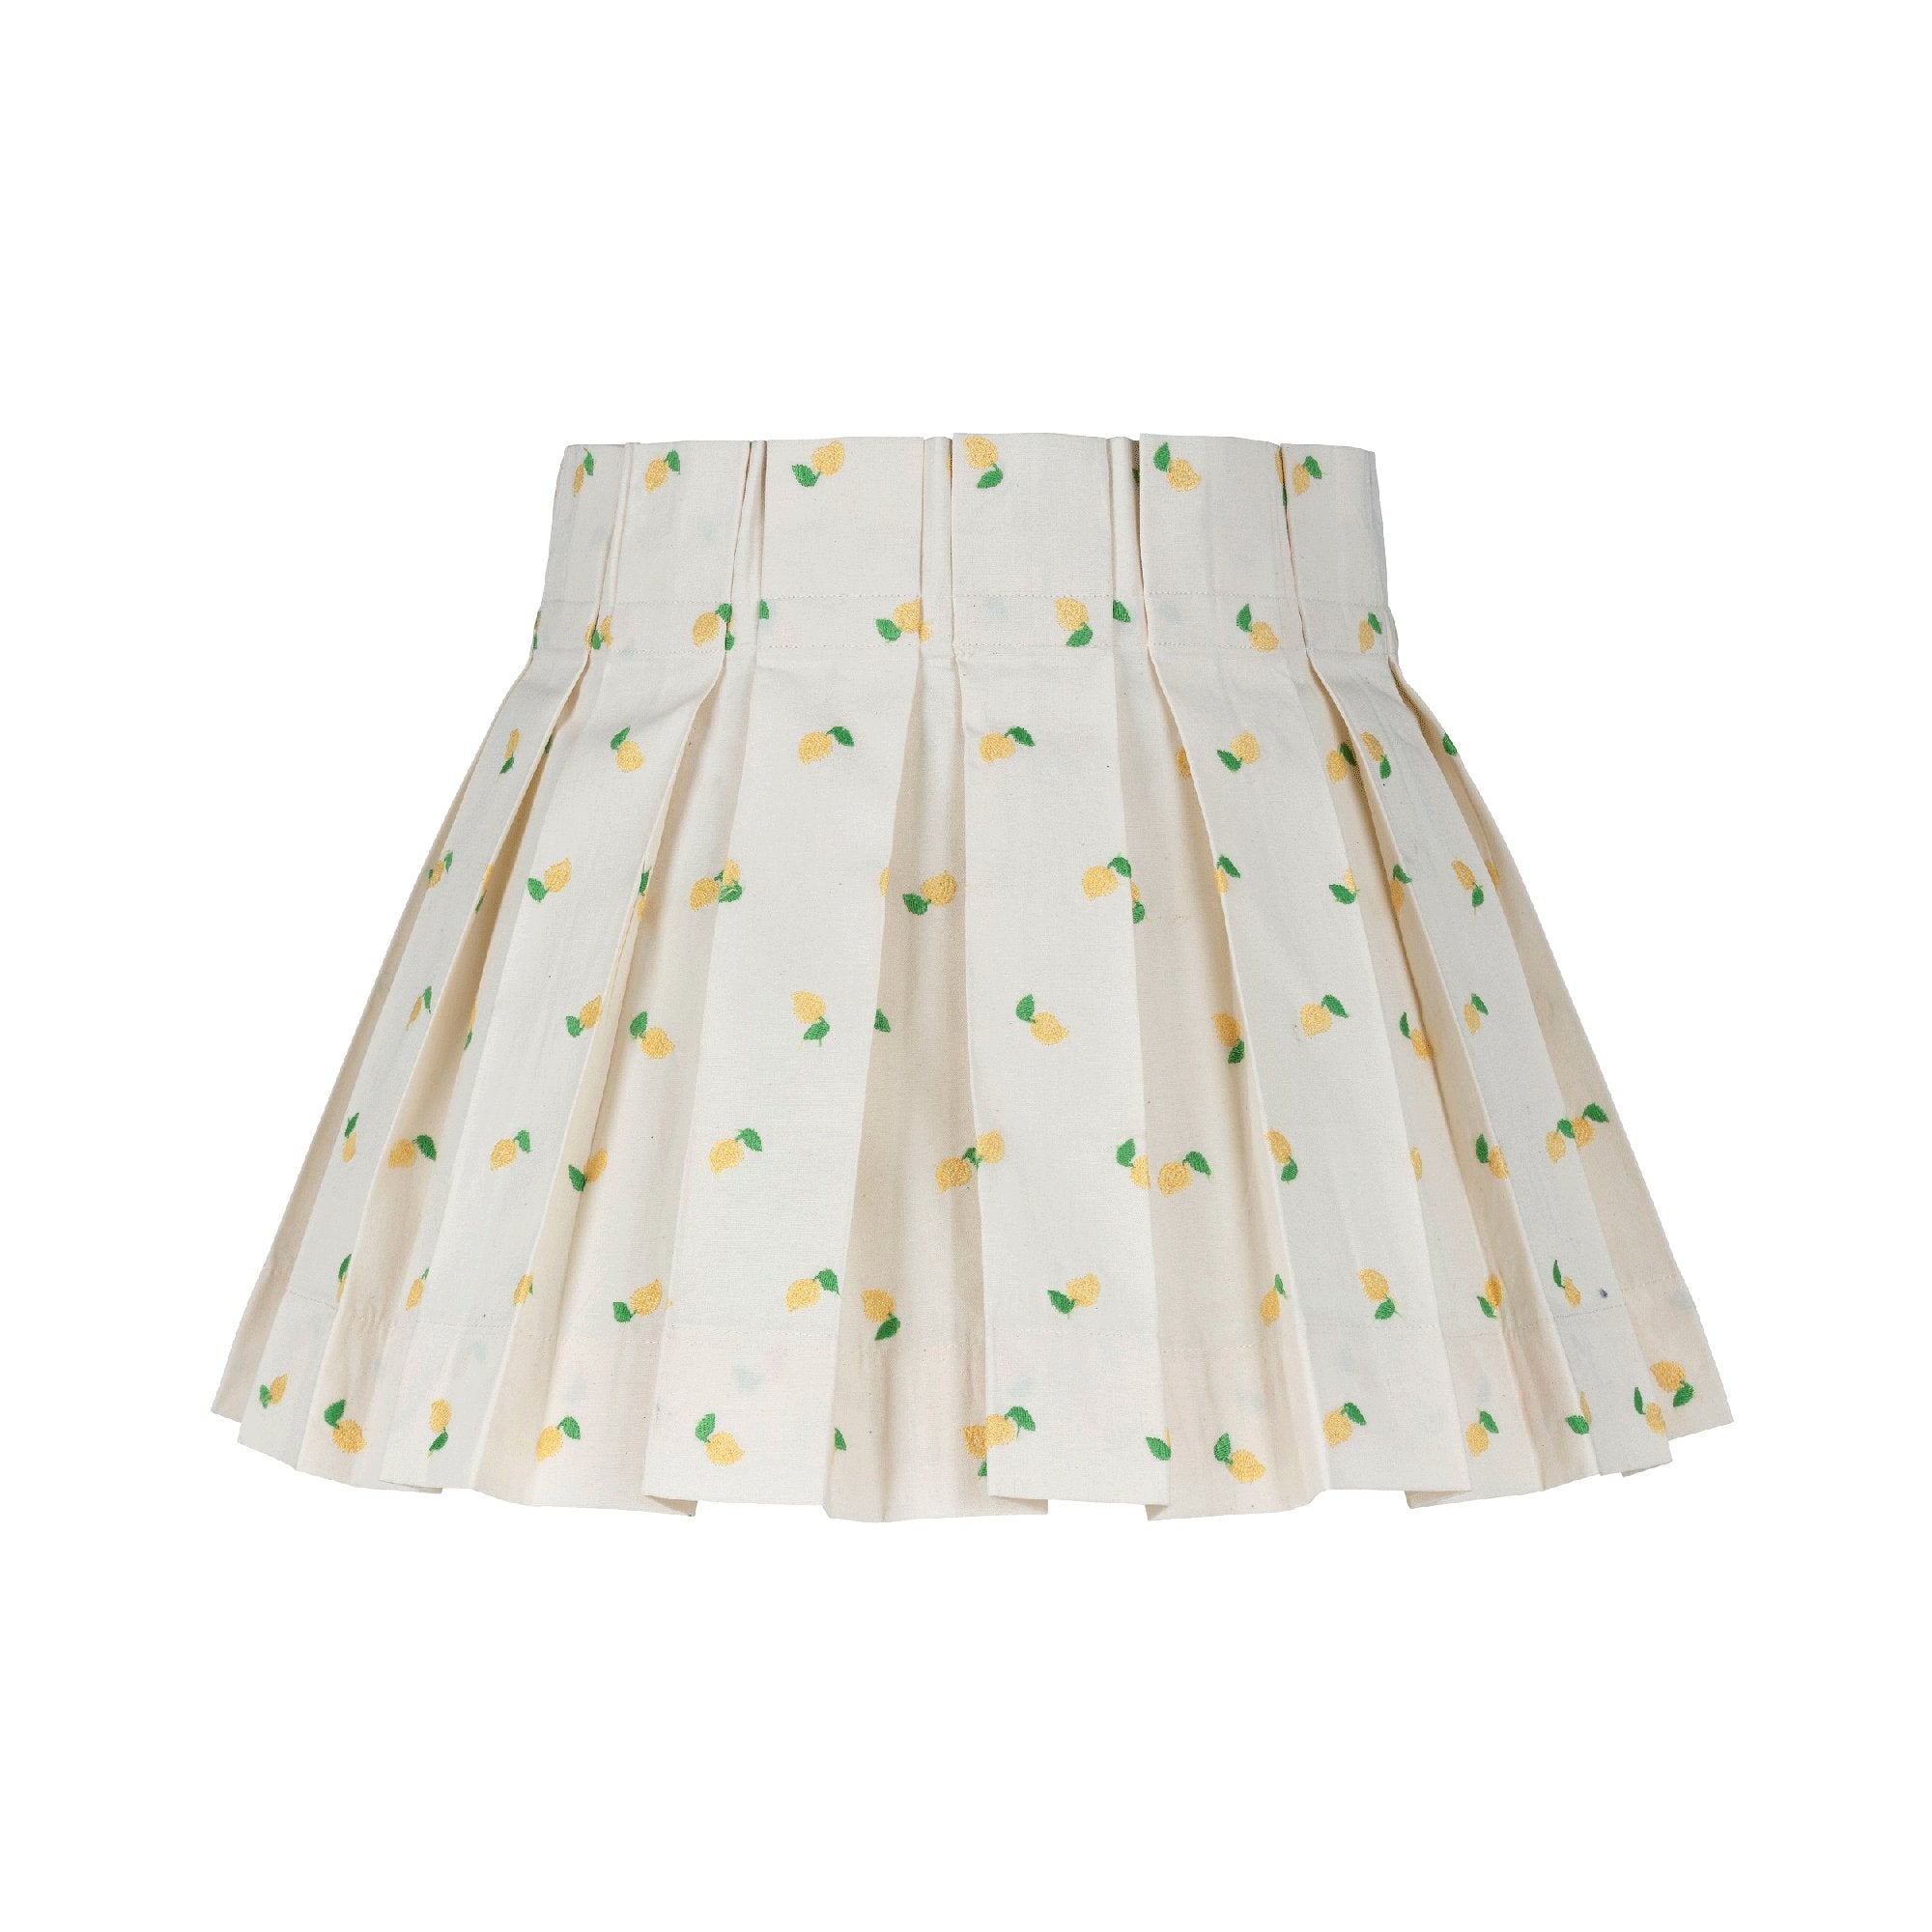 Embroidered Lemon Box Pleat Lampshade - Alice Palmer & Co